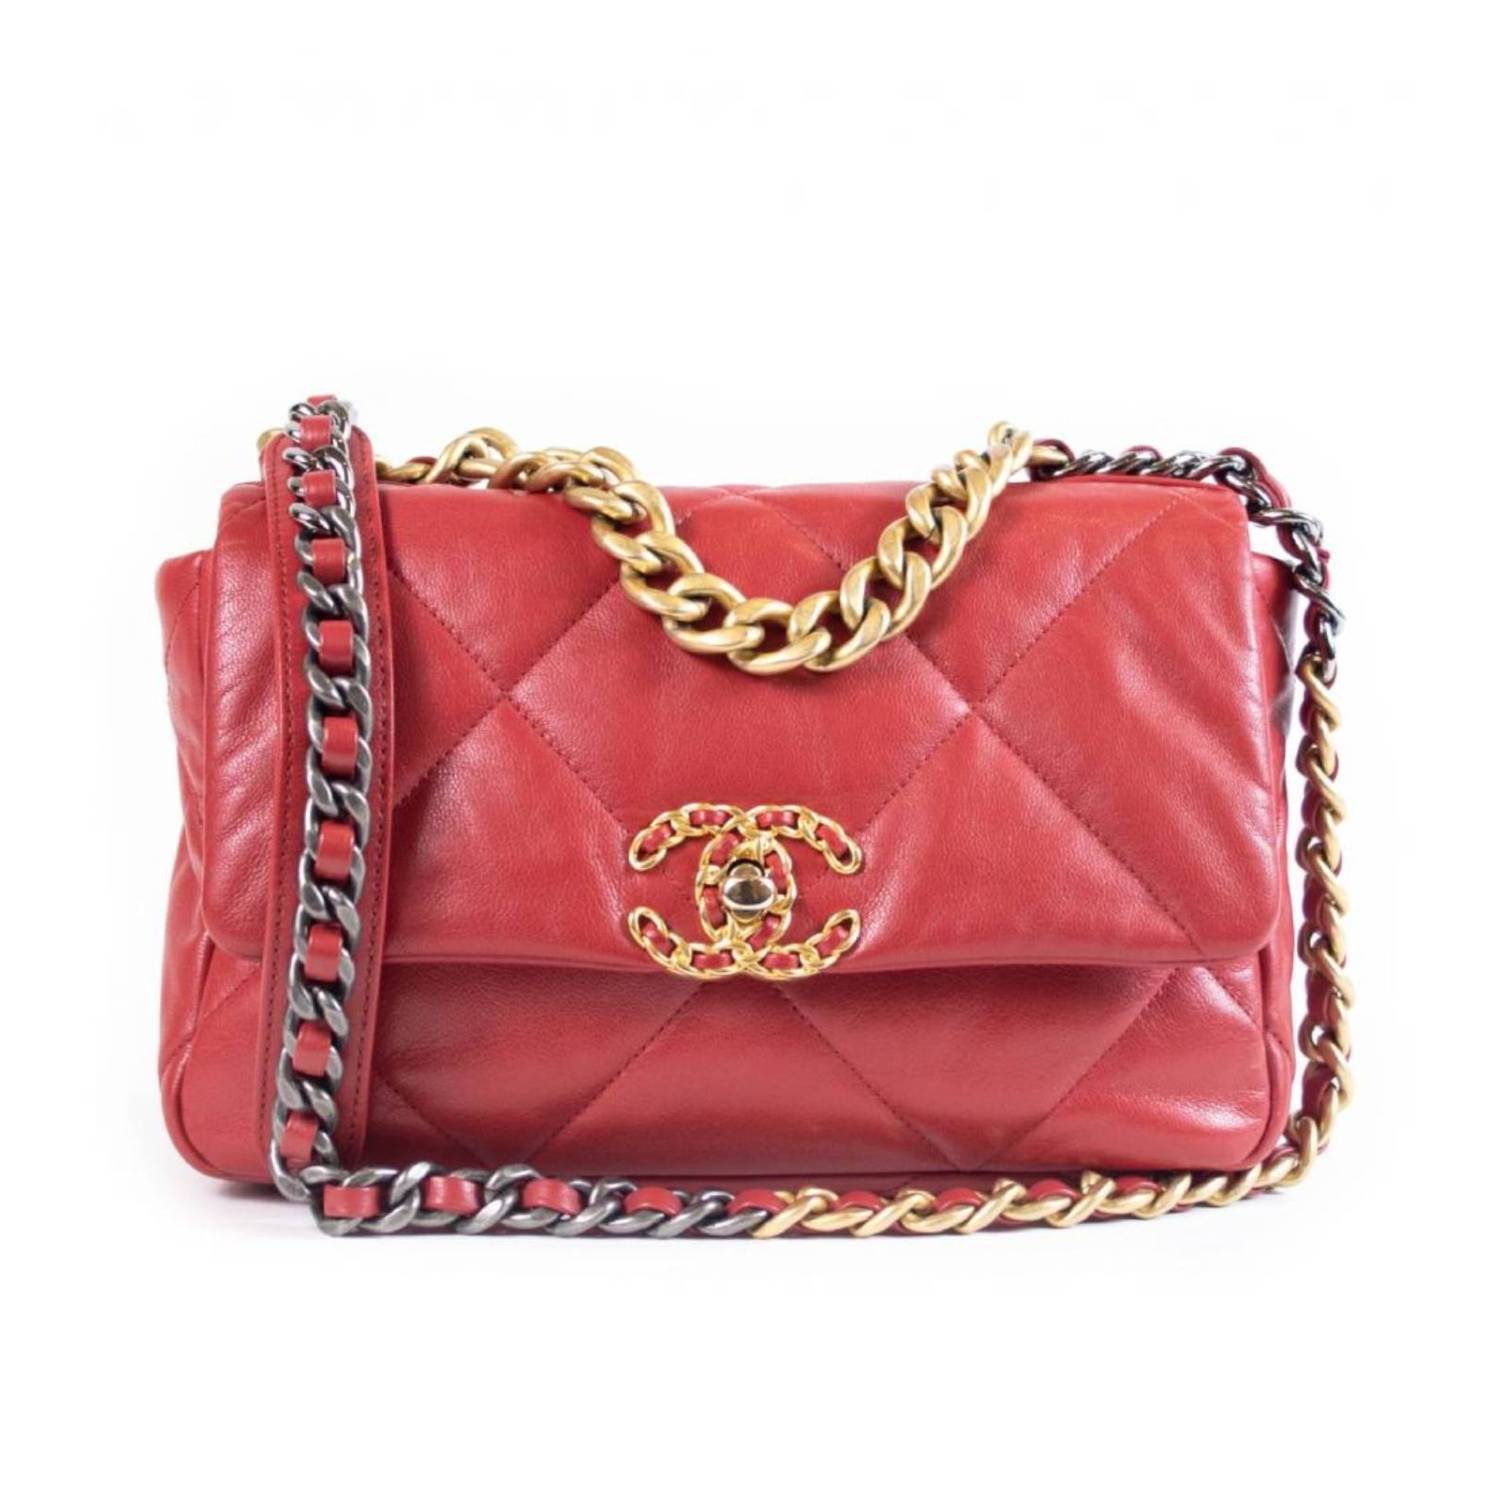 19 Small Flap Bag in Red Goatskin